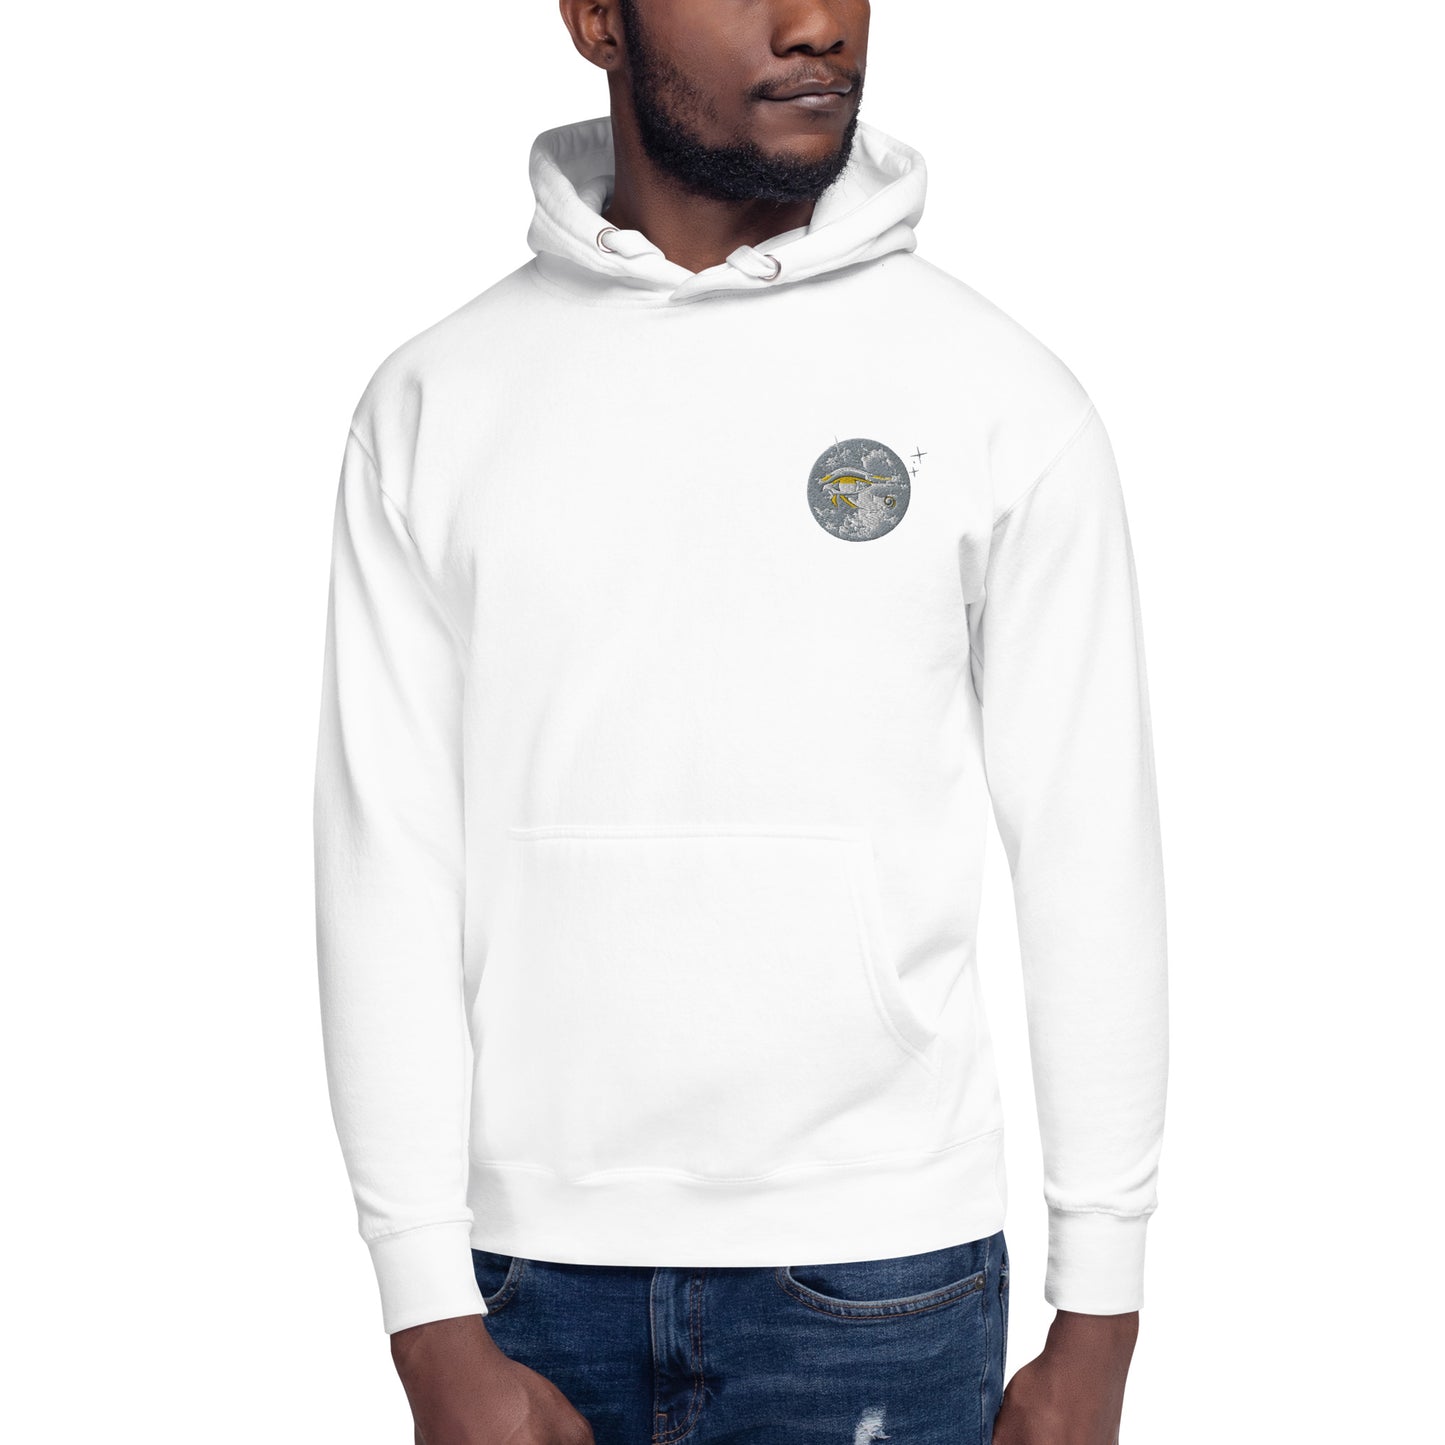 Unisex Hoodie with Logo on chest